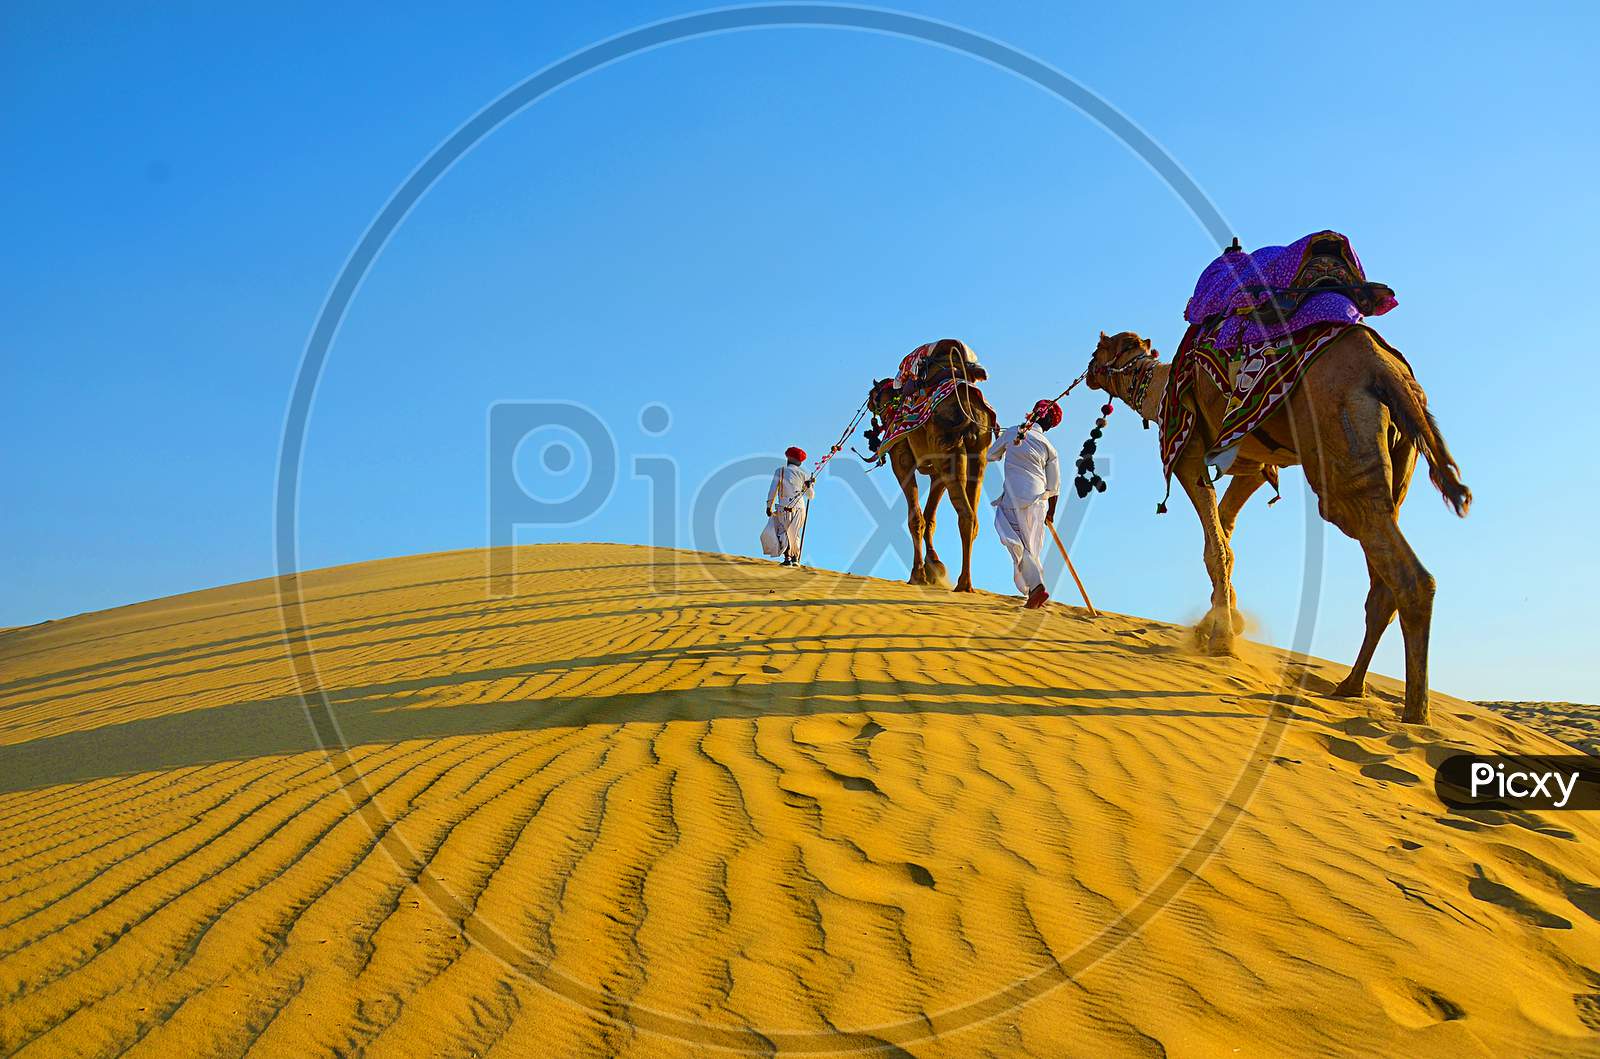 Travel Background - Two Cameleers With Camels Walking On Golden Sand Dunes Of Thar Desert Against Blue Sky , Jaisalmer, Rajasthan, India